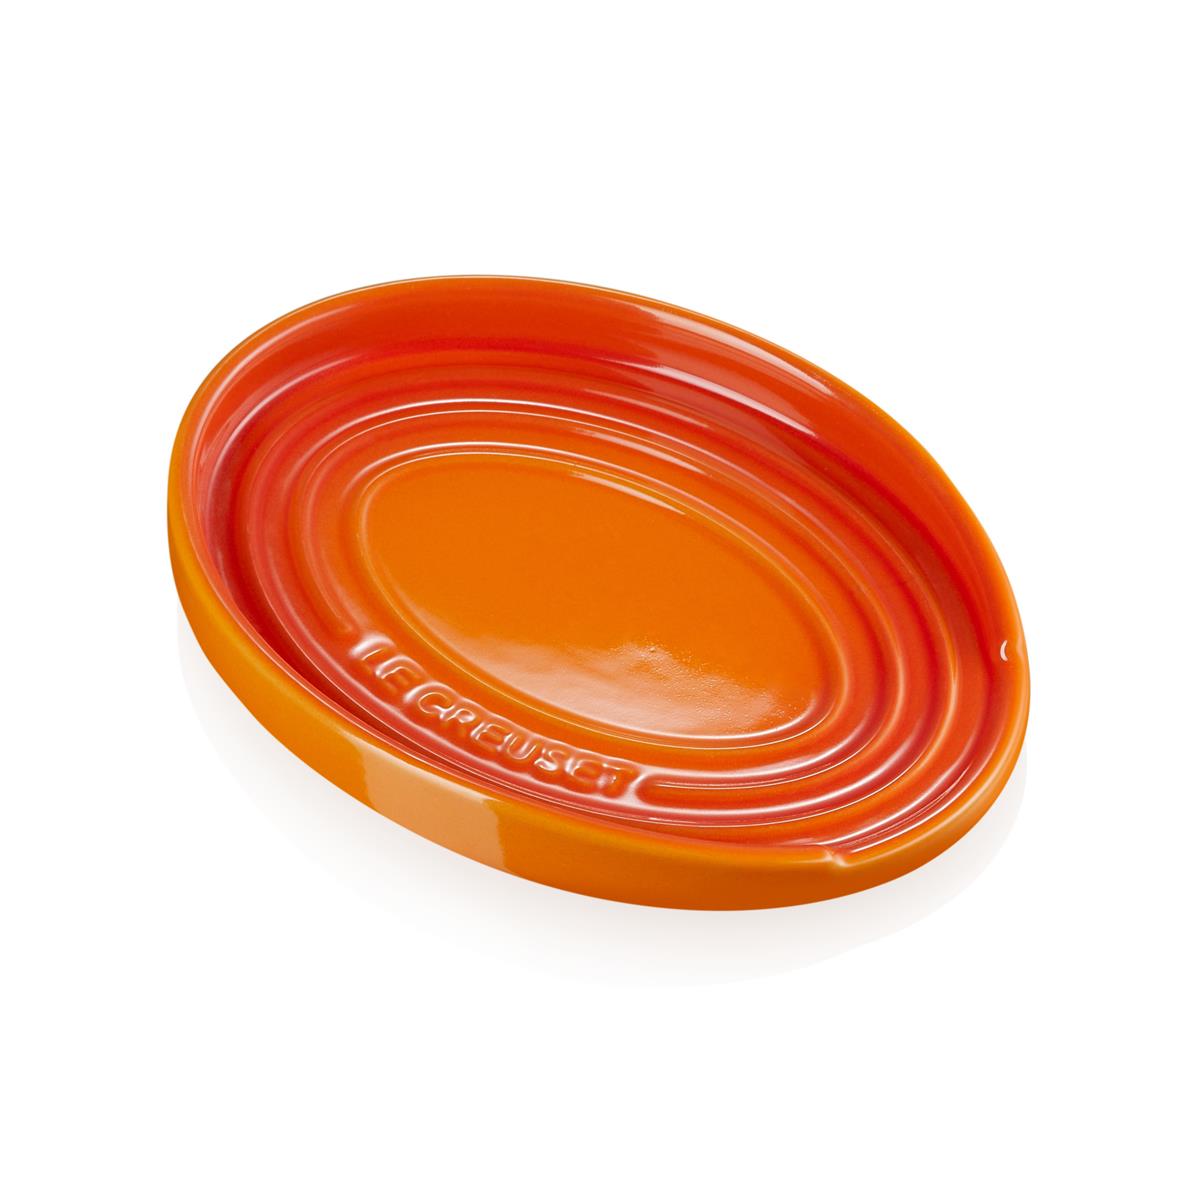 What are the choices for the le creuset spoon rest?